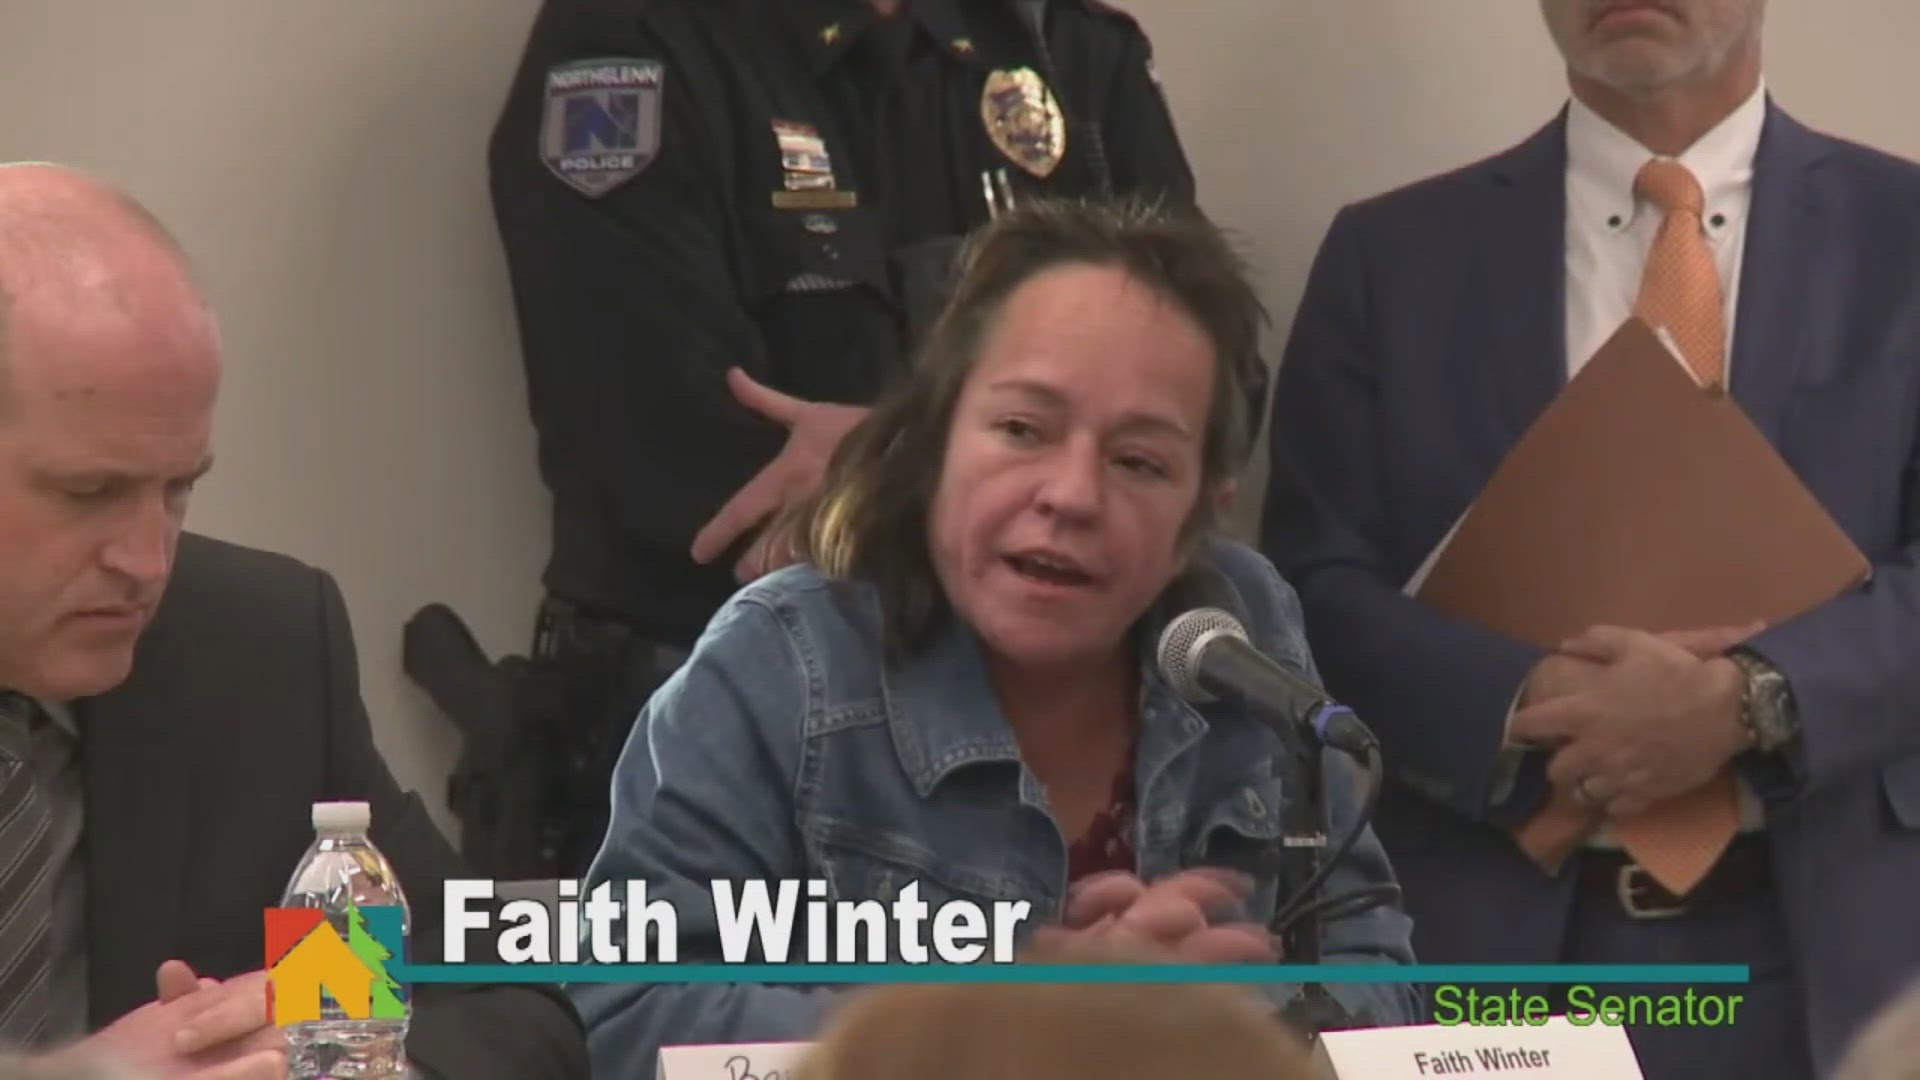 Colorado Politics reports that the resolution says Sen. Faith Winter (D) failed to uphold her office with integrity and has lost confidence with the public.